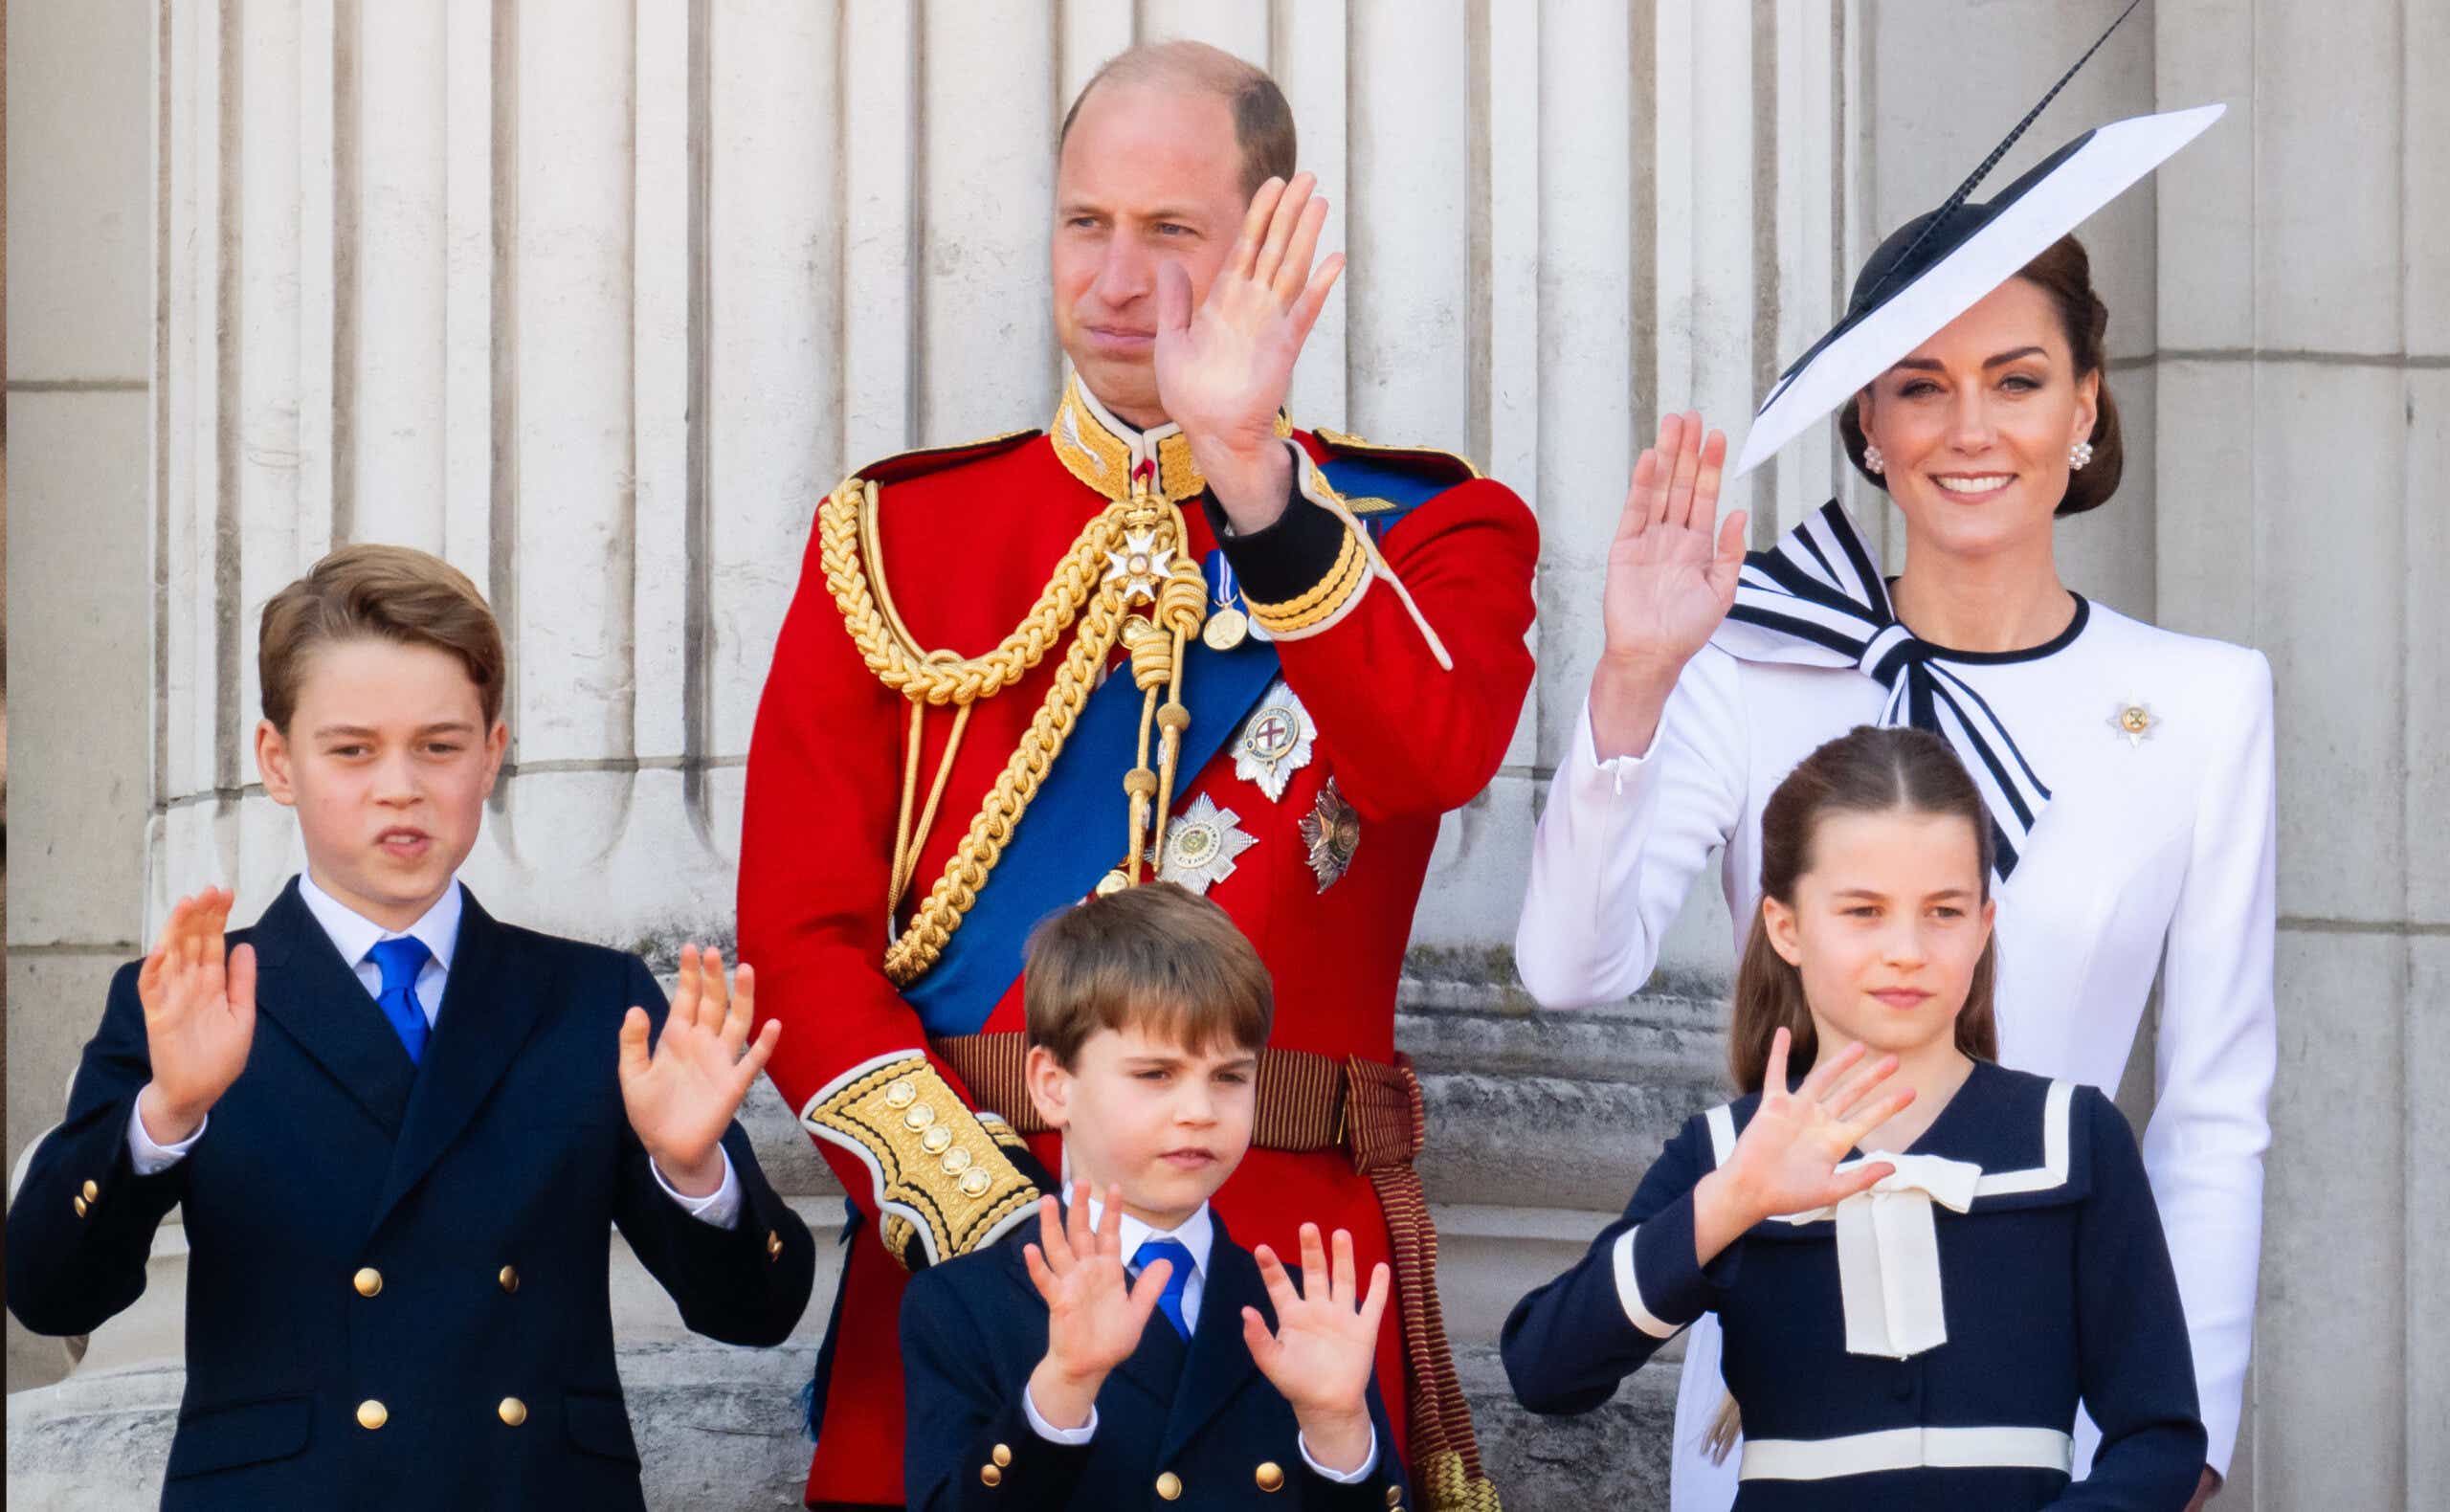 Prince William, Kate Middleton, and their children waving at the Trooping the Colour